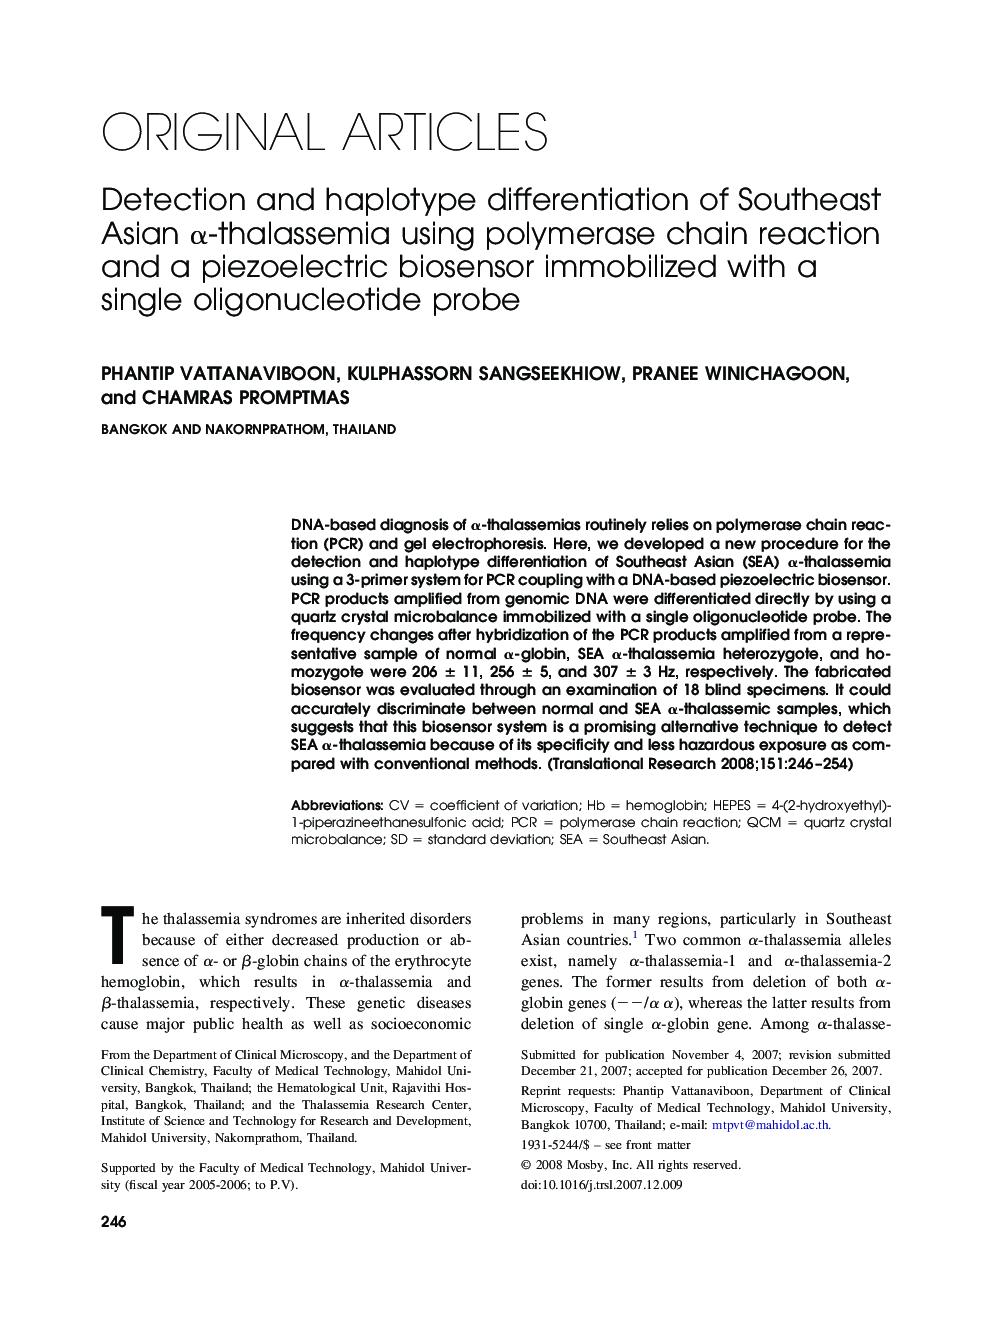 Detection and haplotype differentiation of Southeast Asian Î±-thalassemia using polymerase chain reaction and a piezoelectric biosensor immobilized with a single oligonucleotide probe